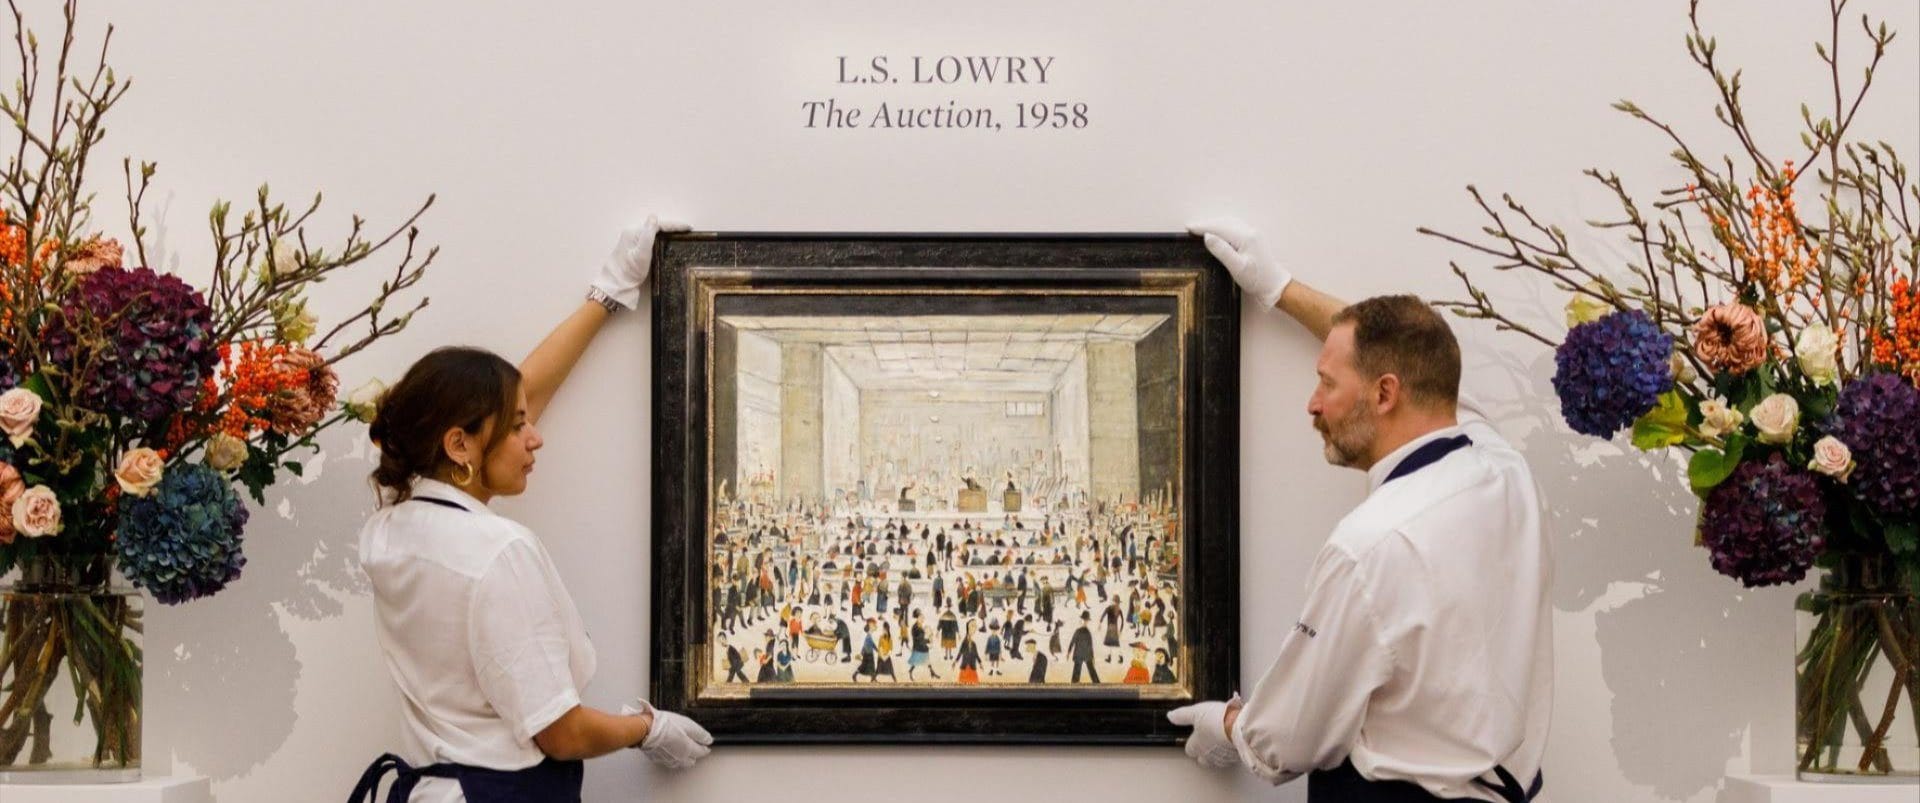 L.S. Lowry's Only Painting